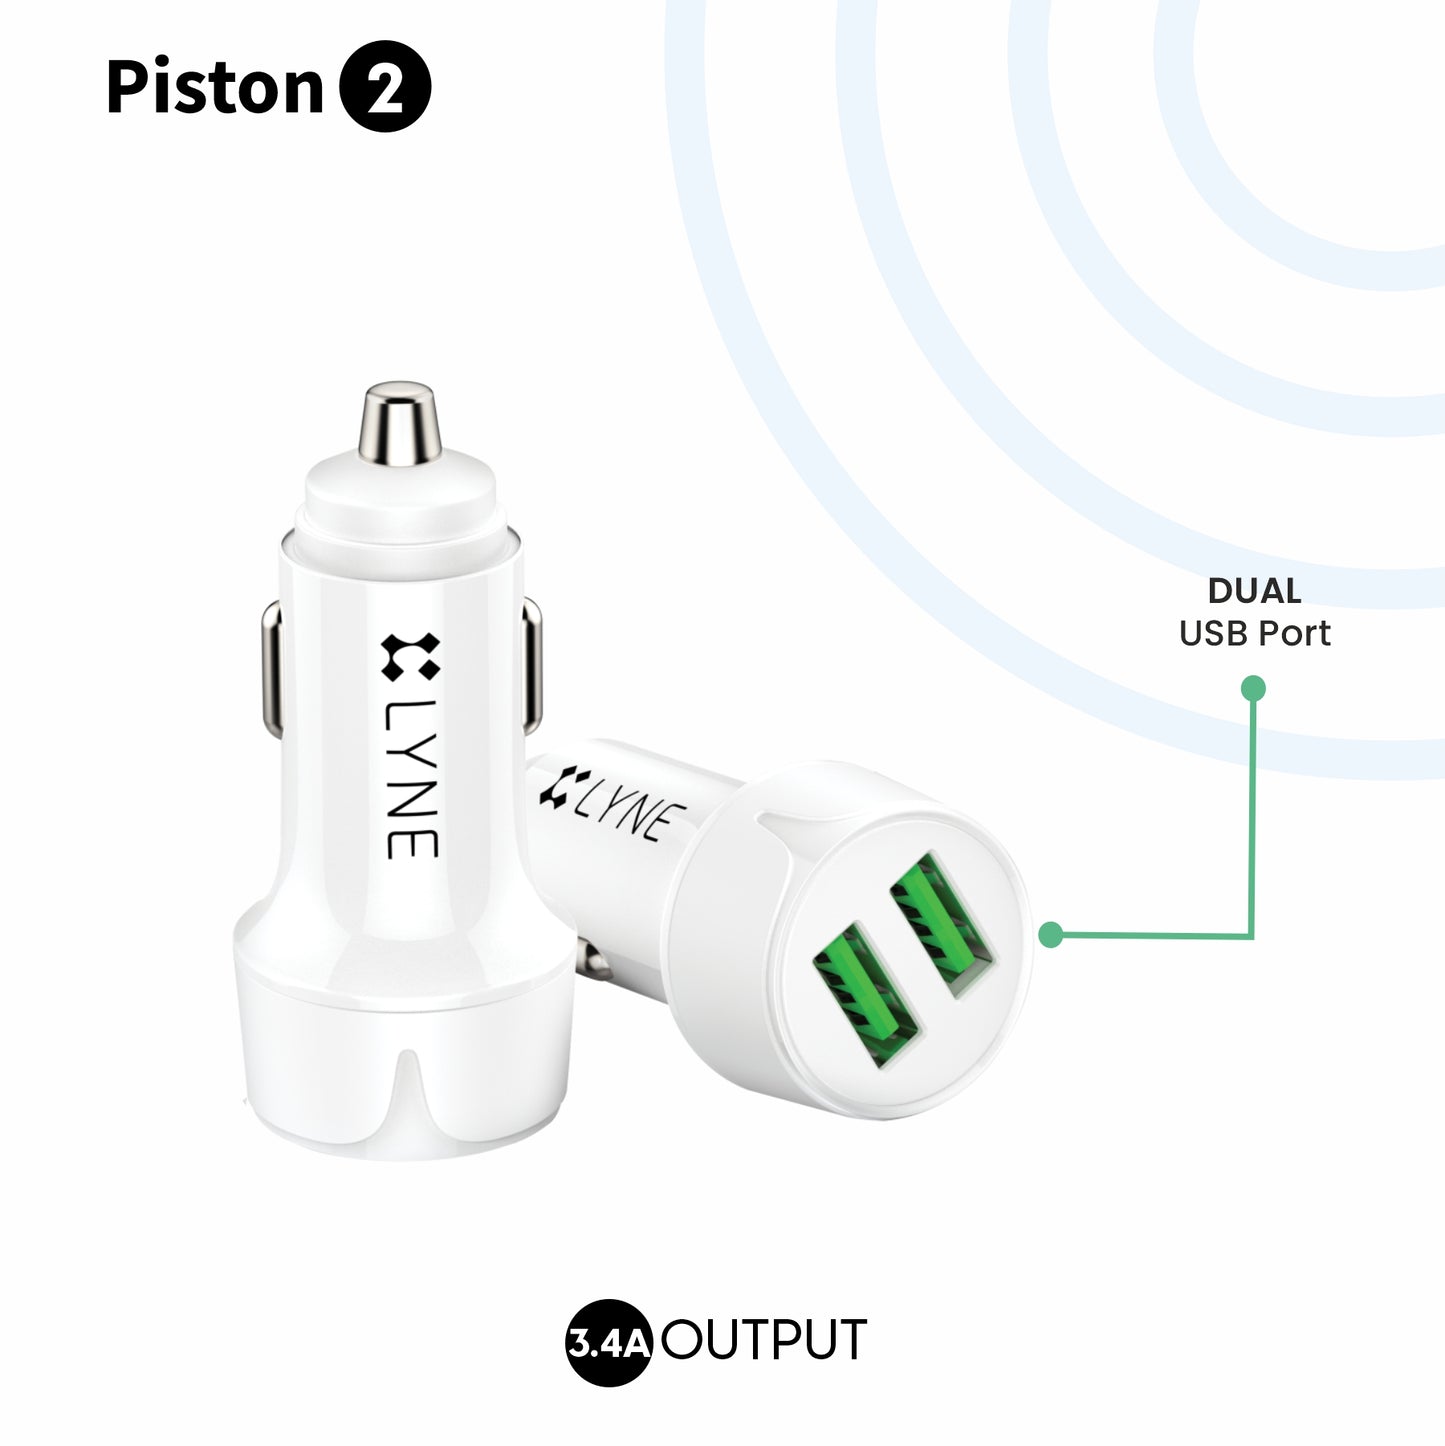 LYNE Piston 2 3.4A Output, Dual USB Port with Cable